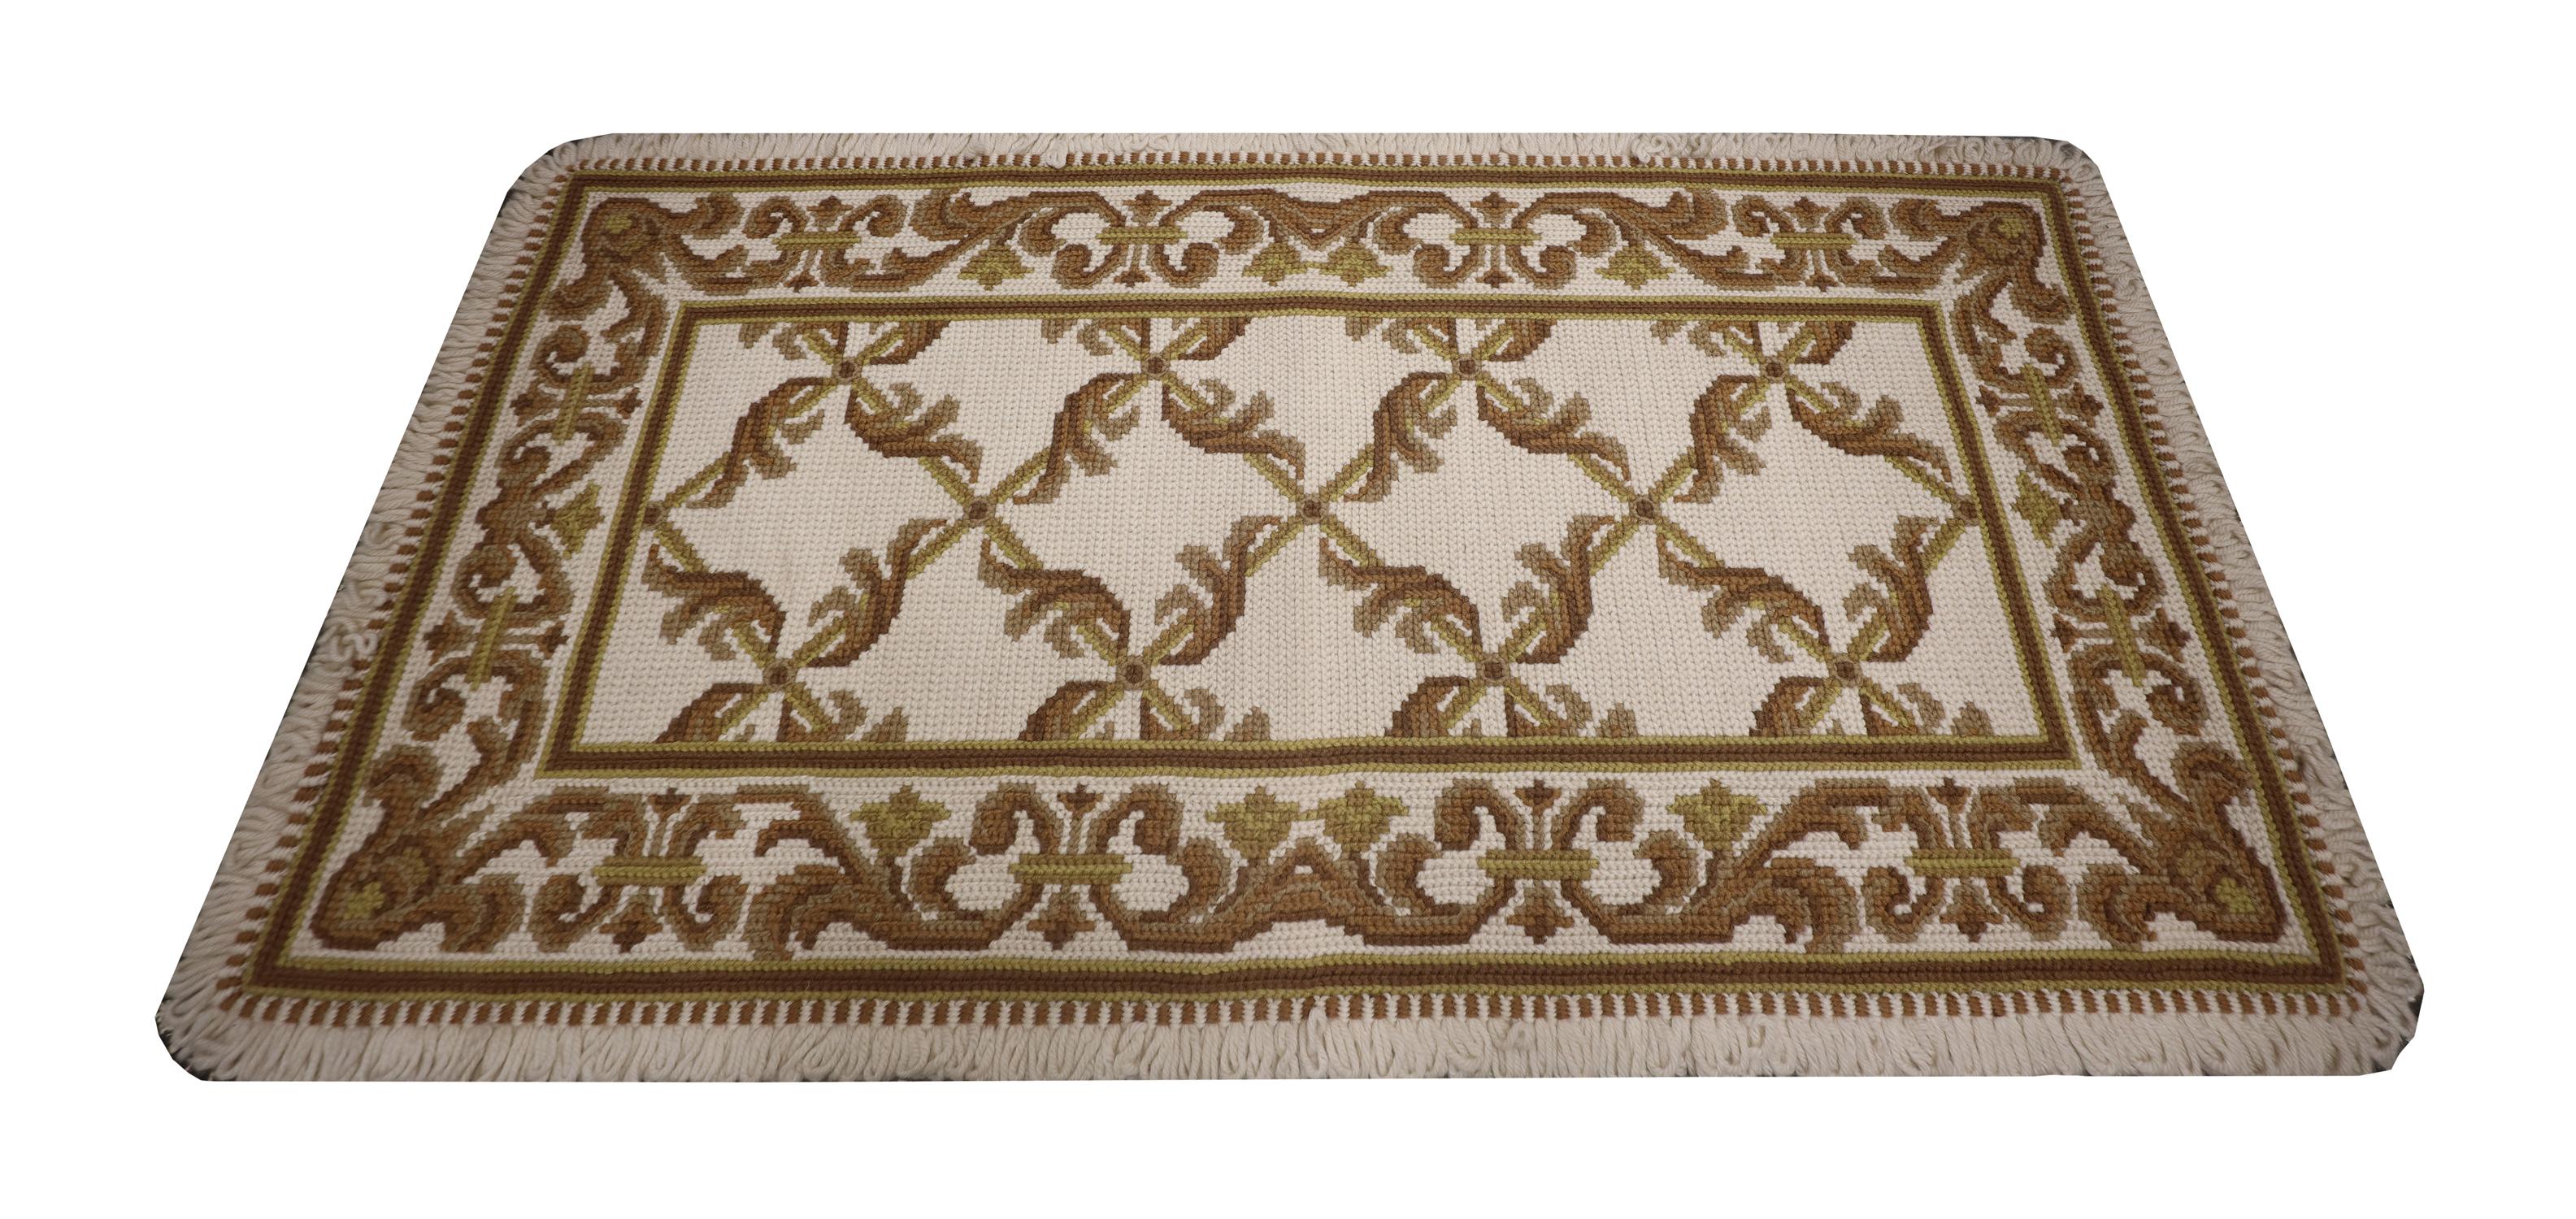 On the lookout for a new carpet to enhance your living room or bedroom? This Beautiful rug could make the perfect accessory. This elegant wool needlepoint is a classic example of a modern Portuguese style rug woven by hand in China in the early 21st